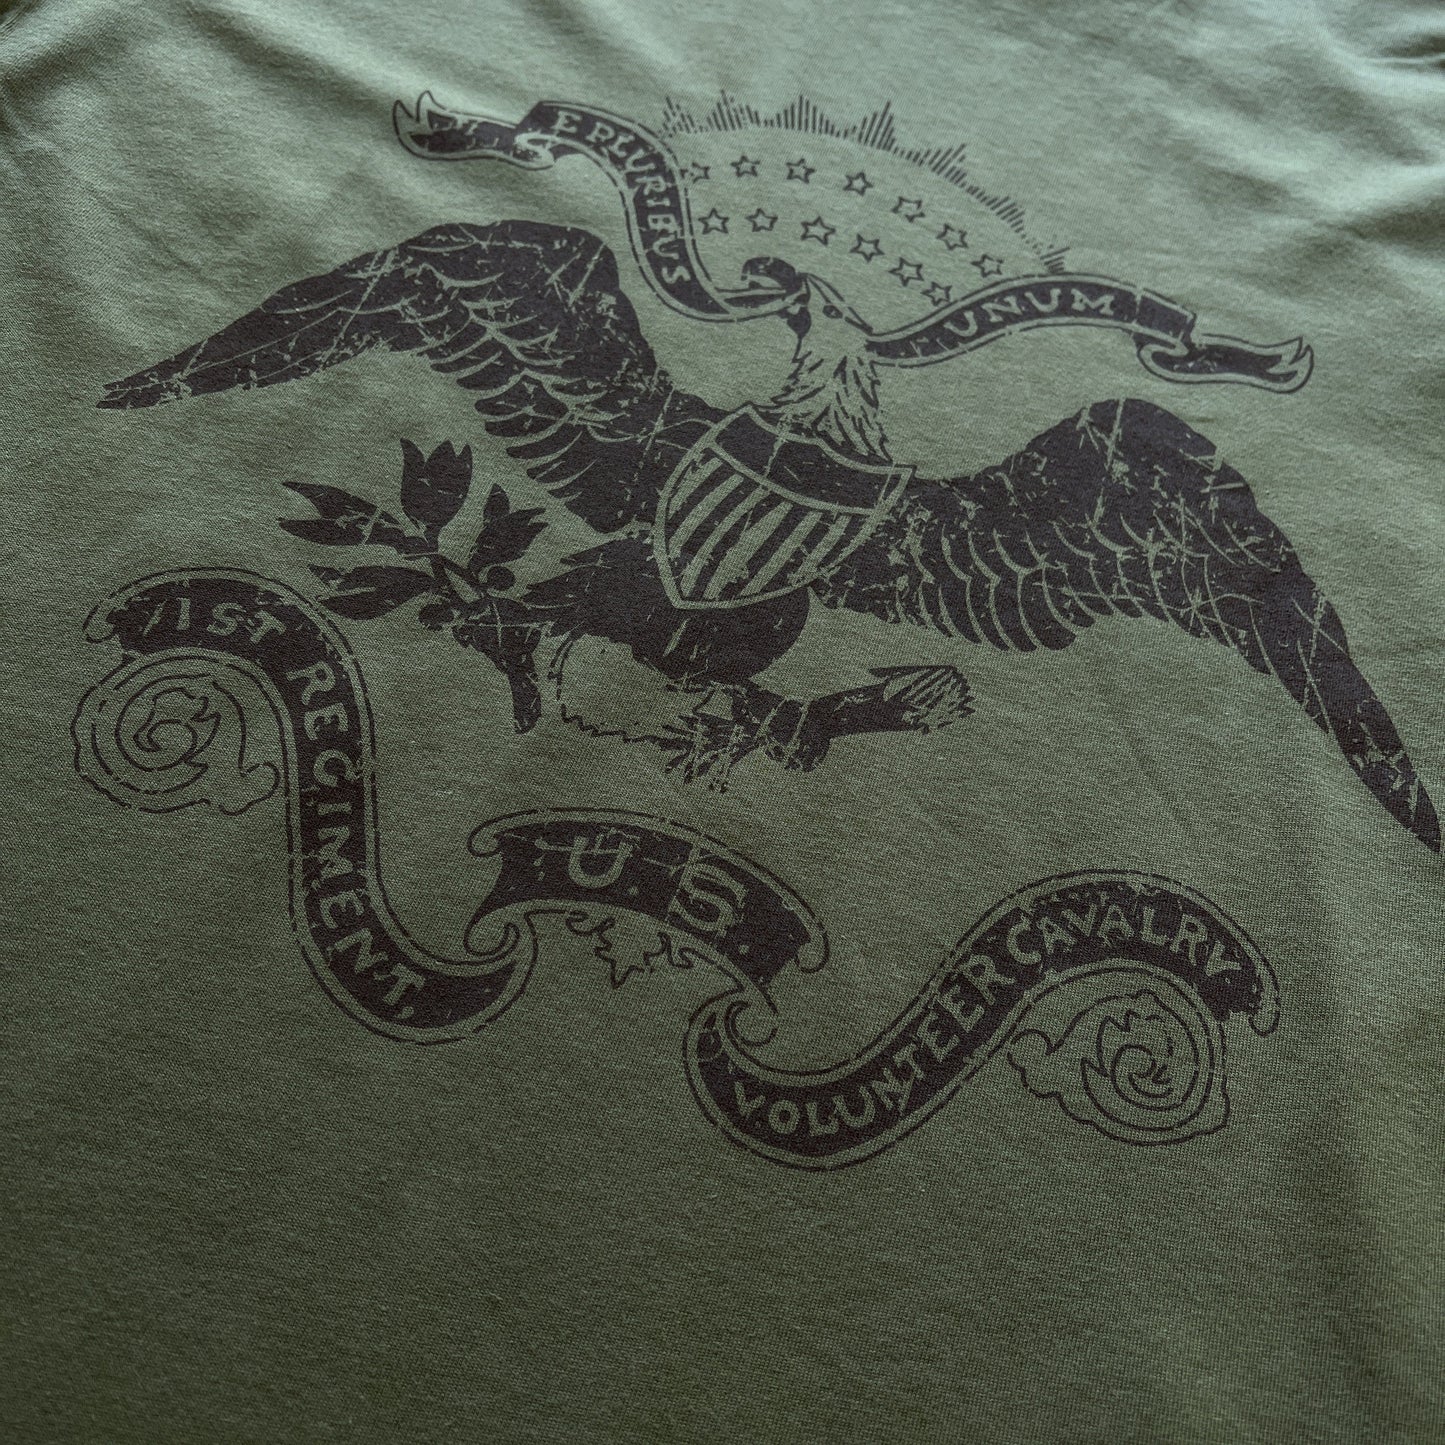 Close-up Teddy Roosevelt "Rough Riders" Shirt from the History List Store